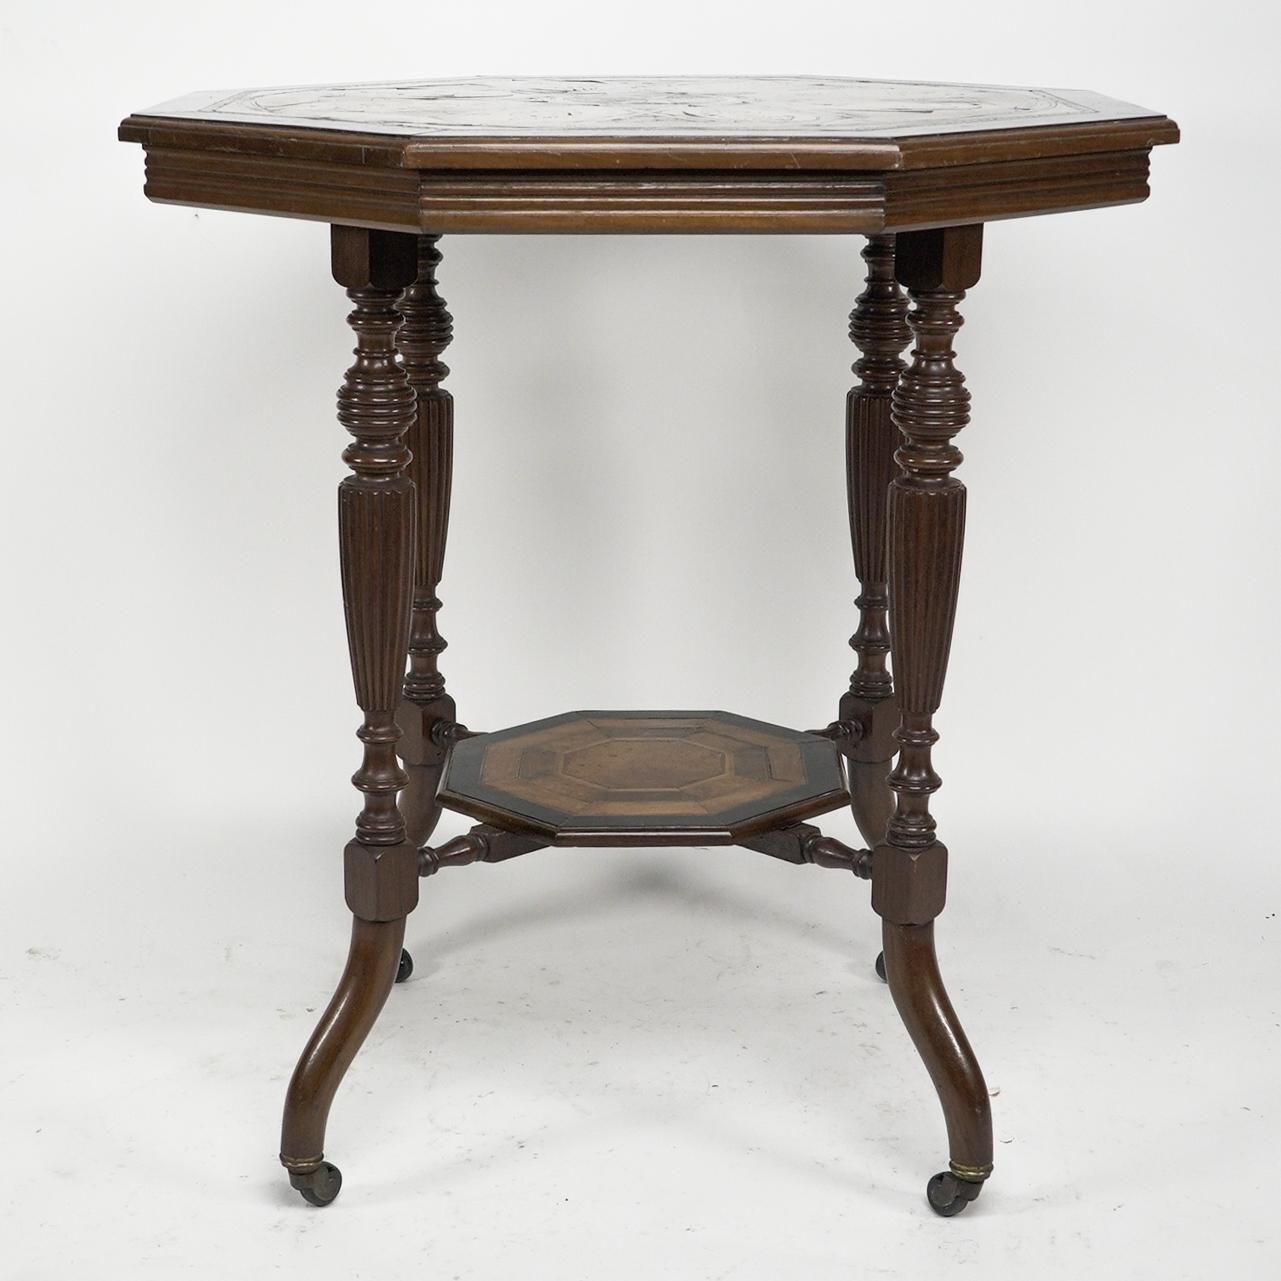 An Aesthetic Movement ebonized side table with a marquetry octagonal top decorated with conch shells and a central star detail in various fruit woods, with ebonized string and chequer inlays. Stood on turned and fluted legs united by a further